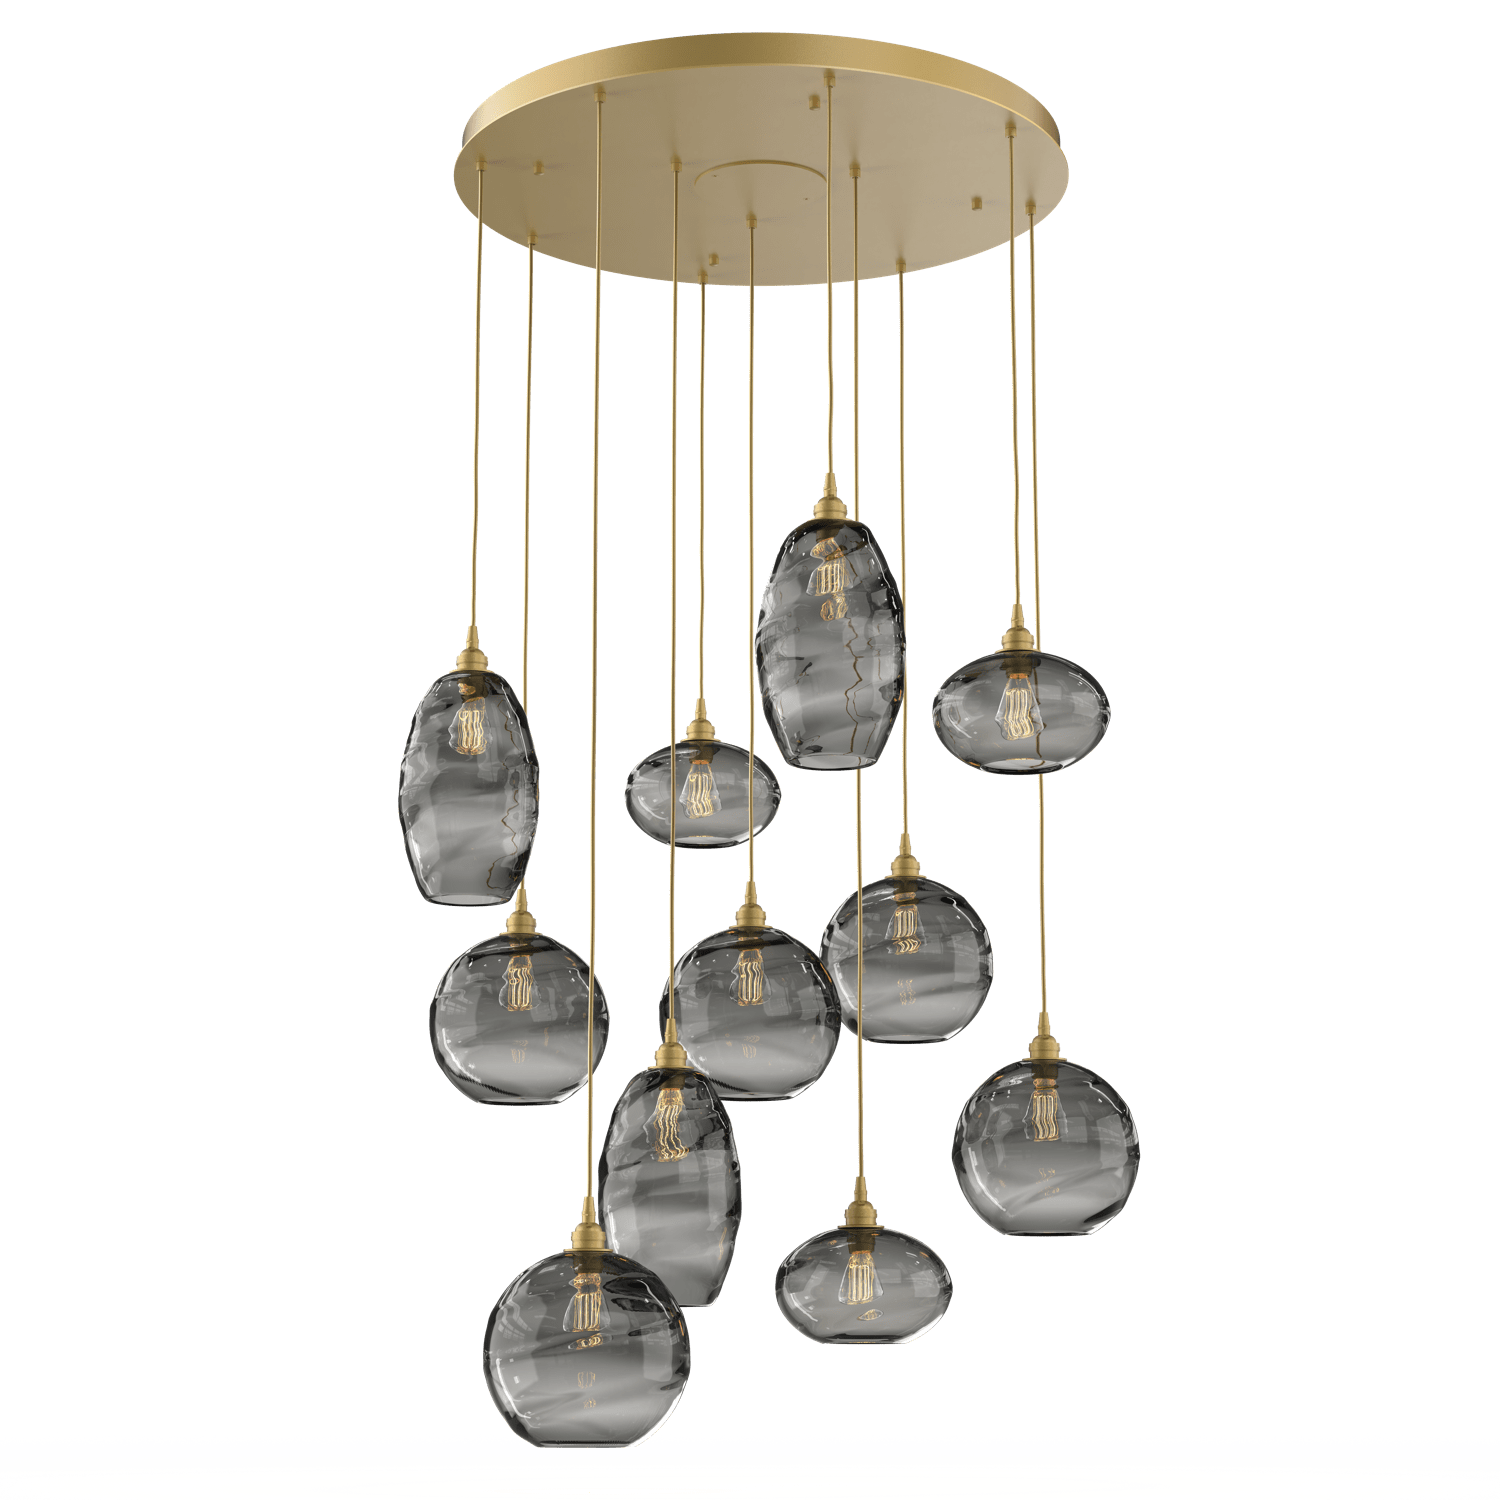 CHB0048-11-GB-OS-Hammerton-Studio-Optic-Blown-Glass-Misto-11-light-round-pendant-chandelier-with-gilded-brass-finish-and-optic-smoke-blown-glass-shades-and-incandescent-lamping